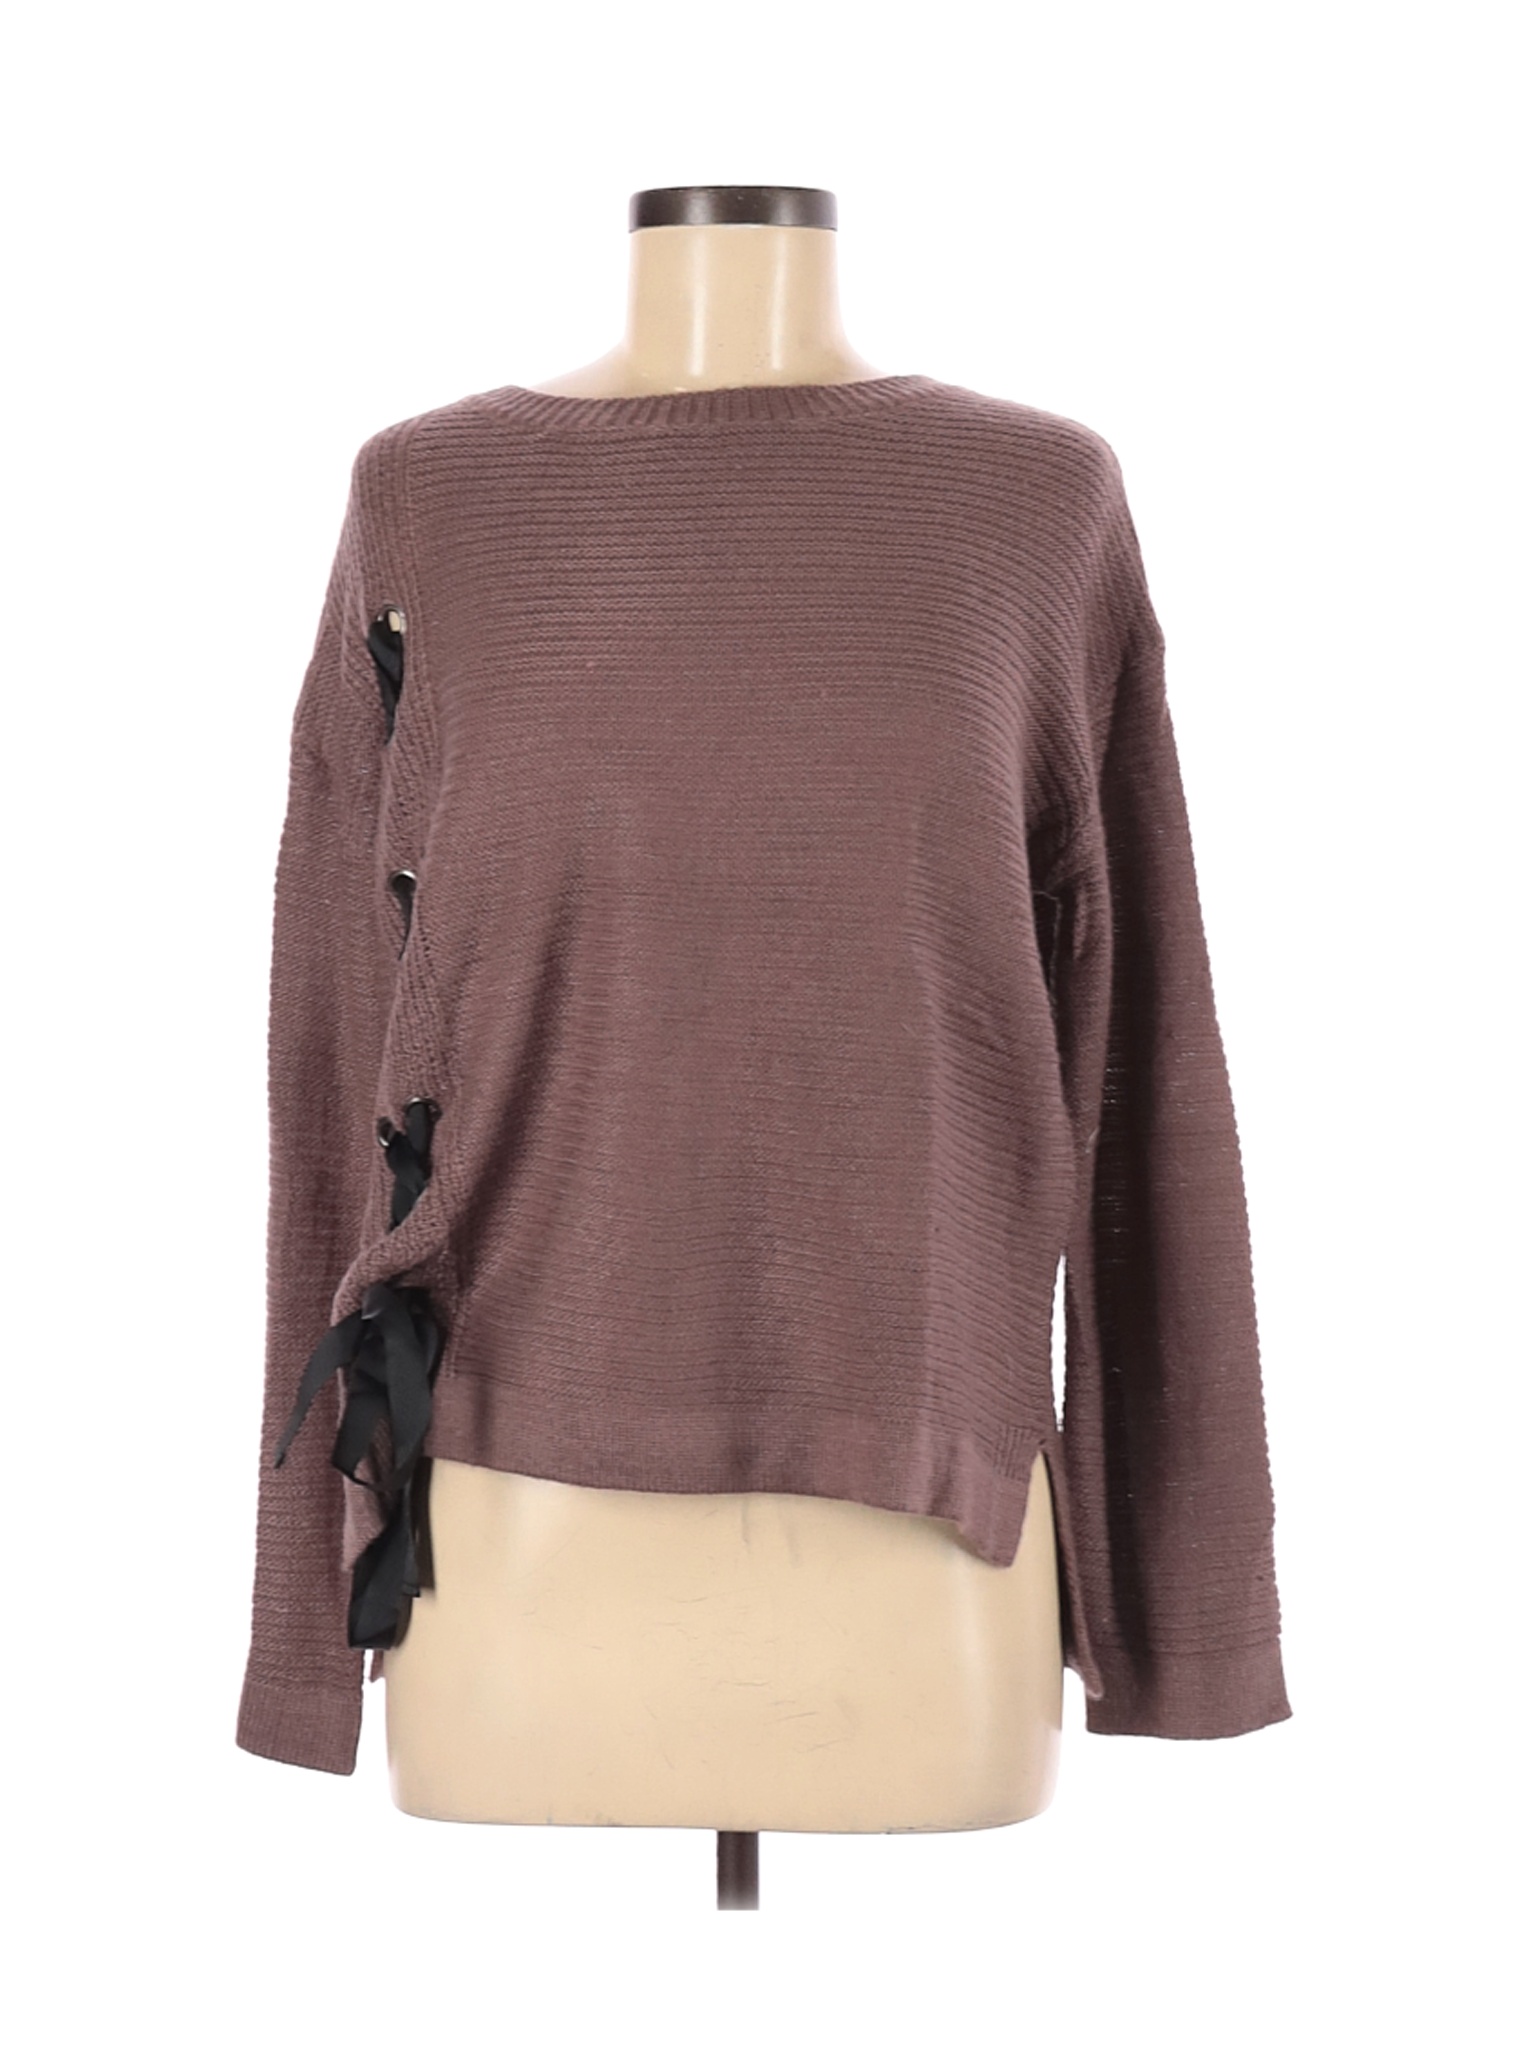 Be Cool Women Brown Pullover Sweater M | eBay